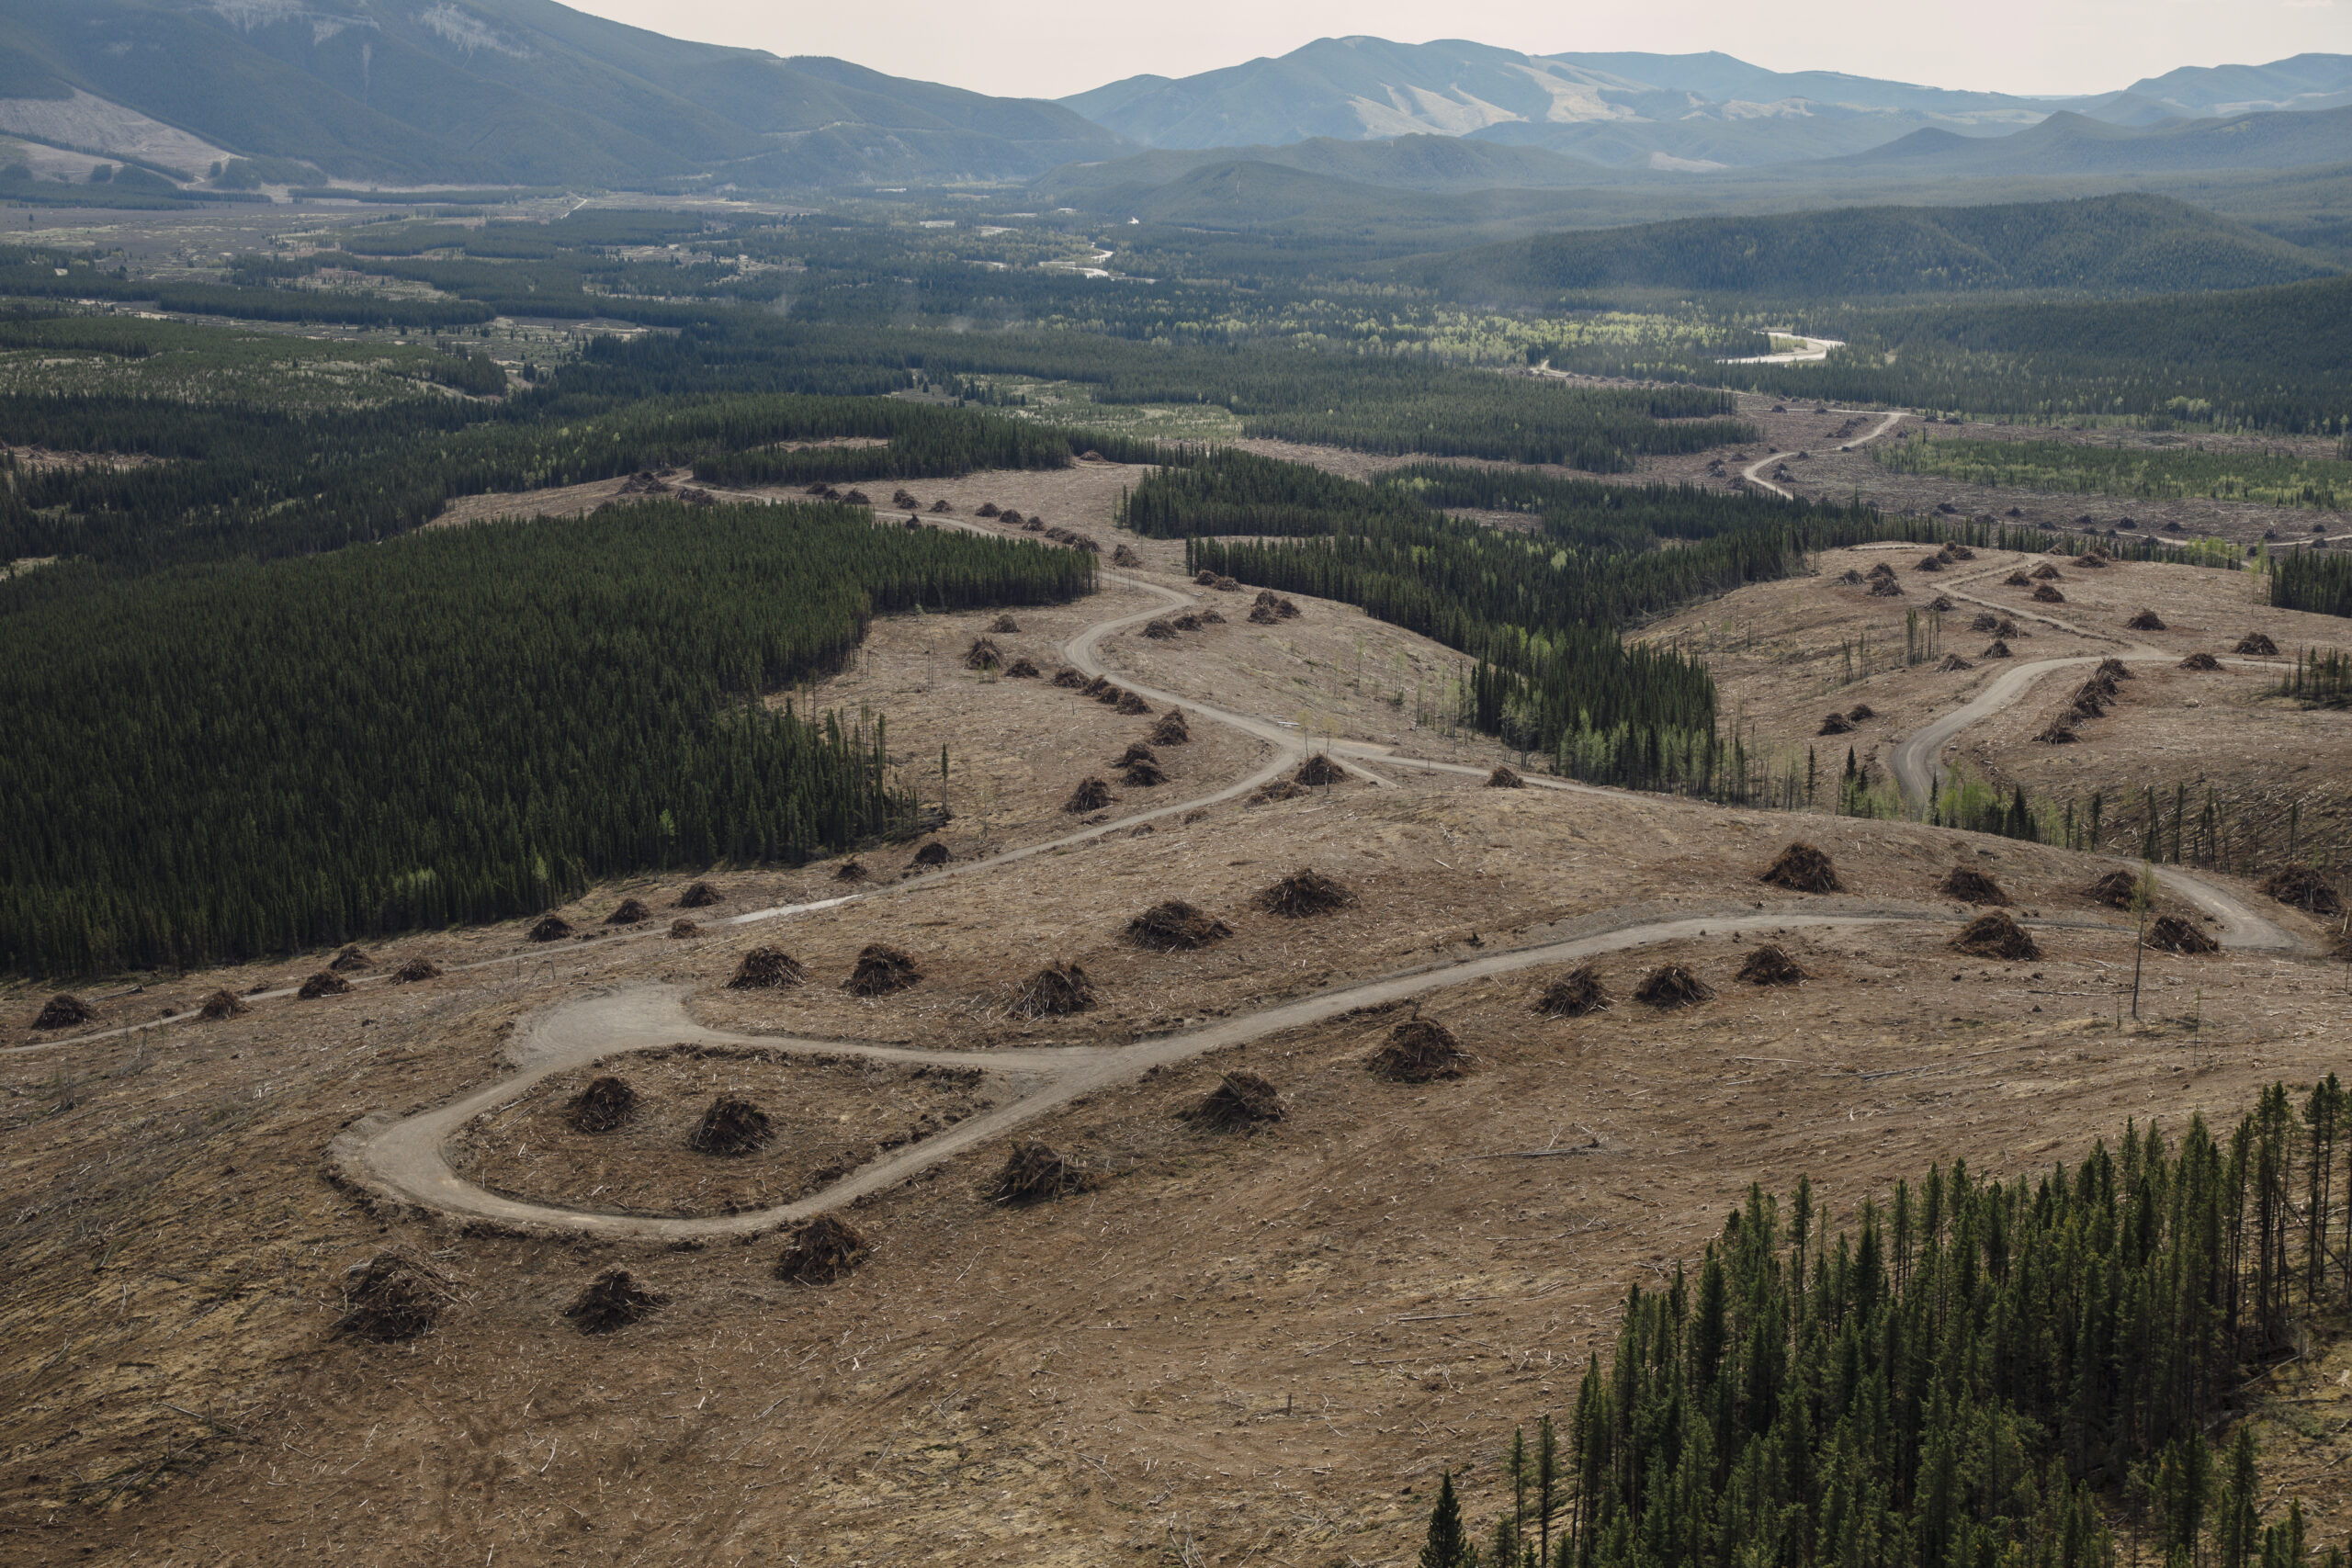 Exploration for new coal mines along the Rocky Mountains resulted in landscape effects